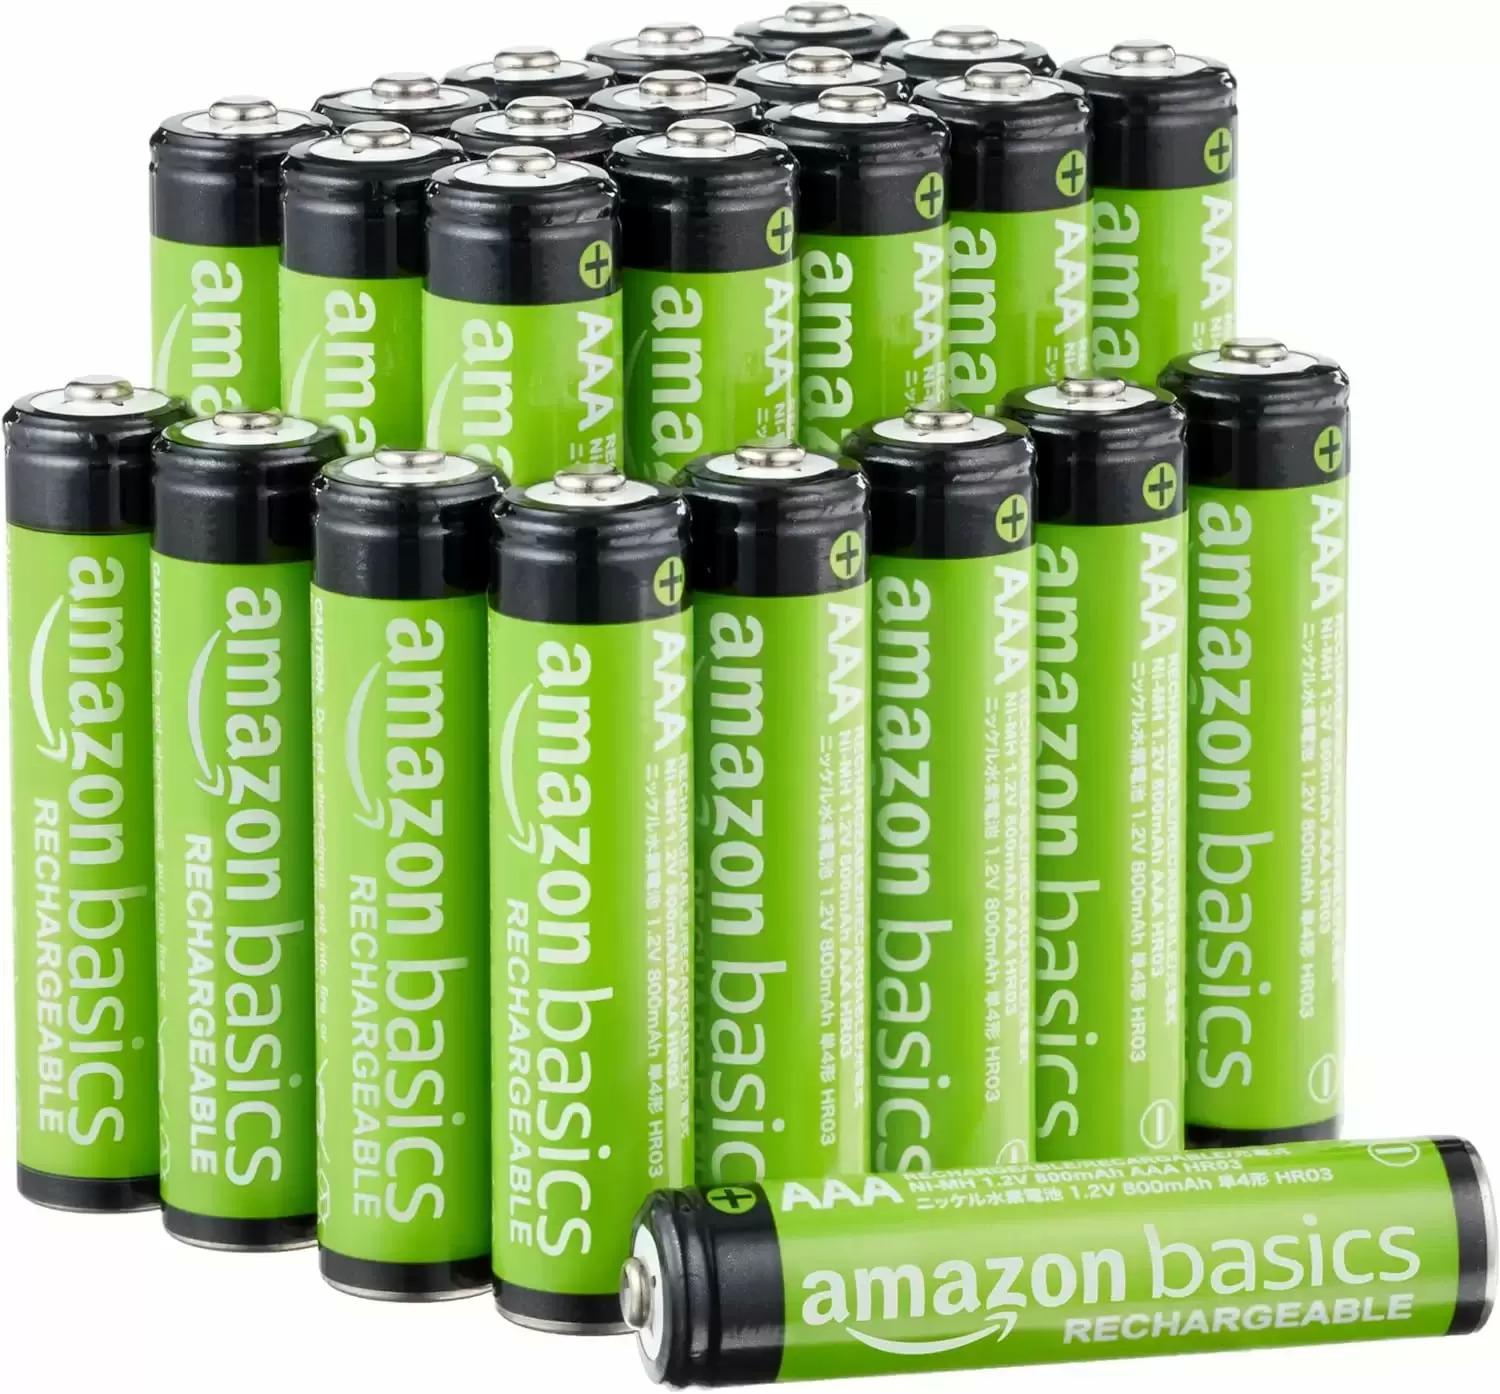 Amazon Basics Rechargeable AAA NiMH Batteries 24 Pack for $13.80